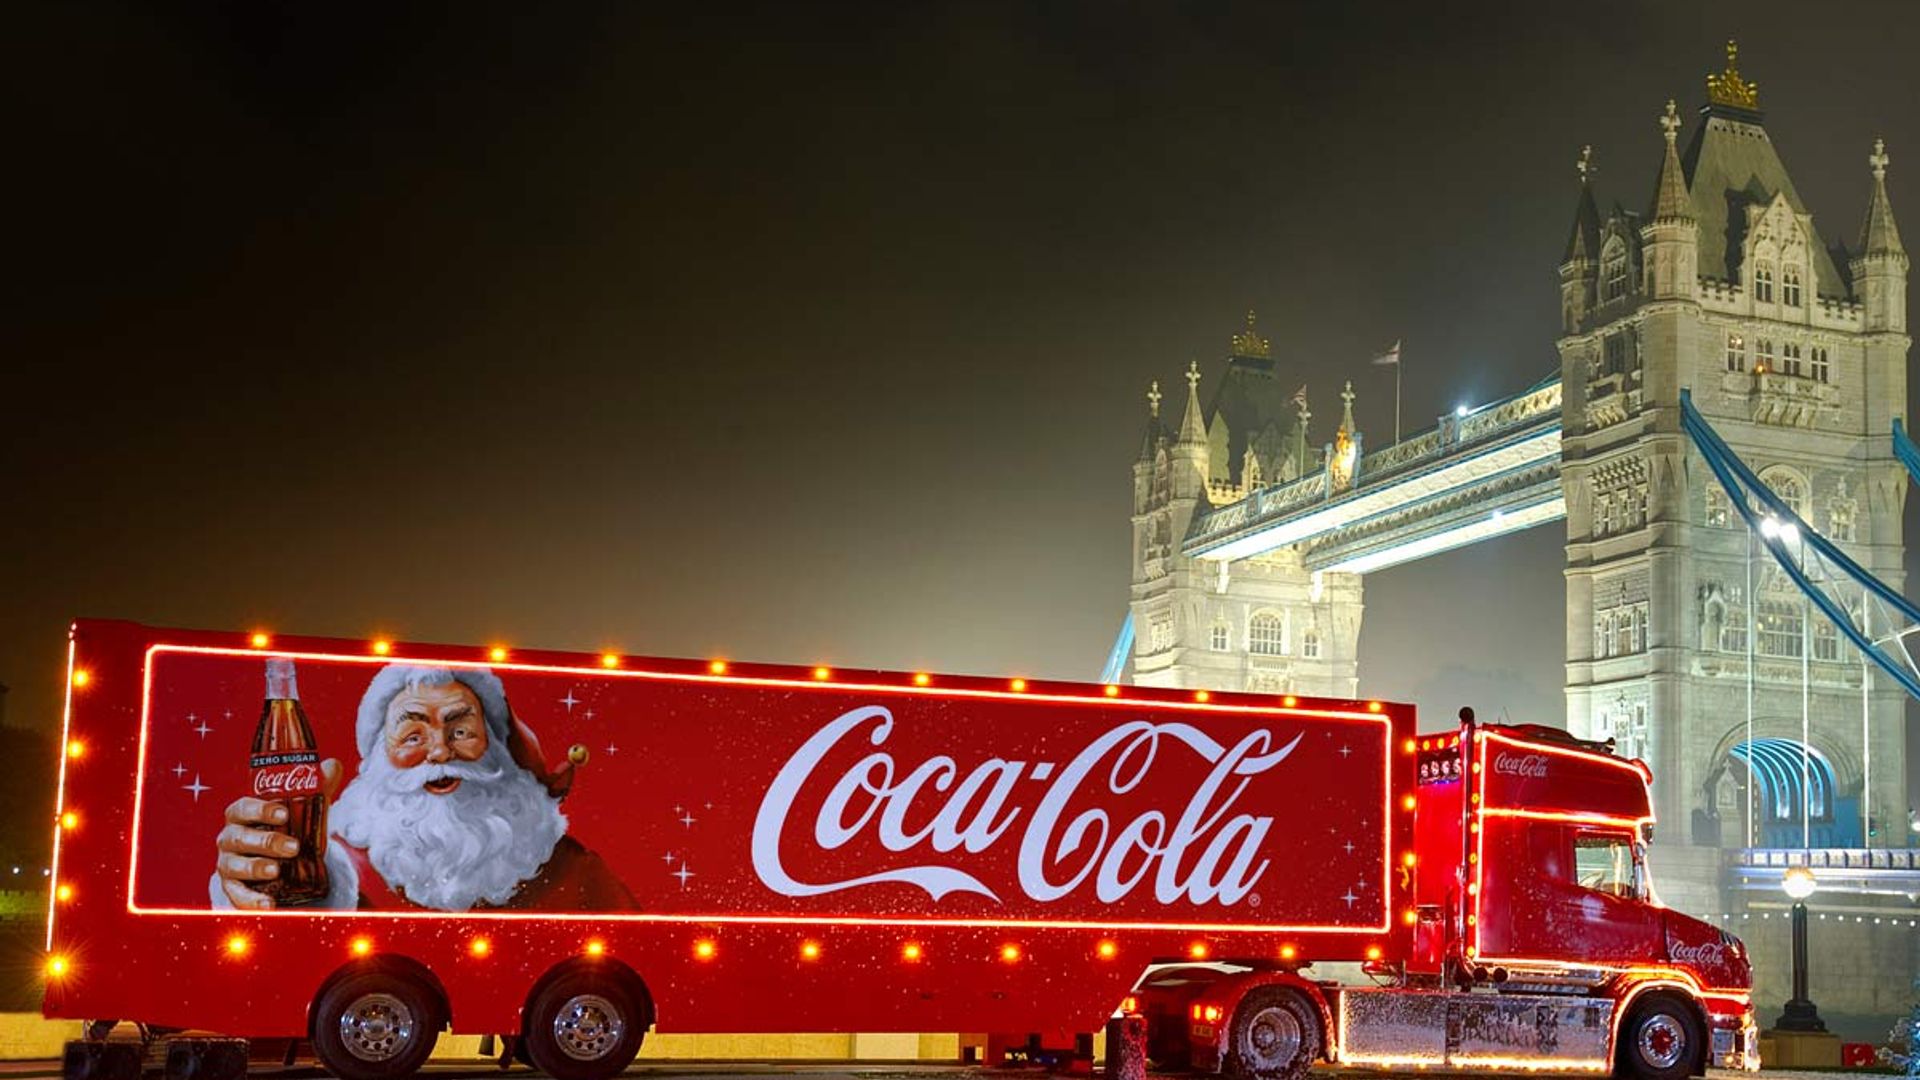 Coca Cola Christmas Truck 2019 Dates Confirmed Where To Find It Hello